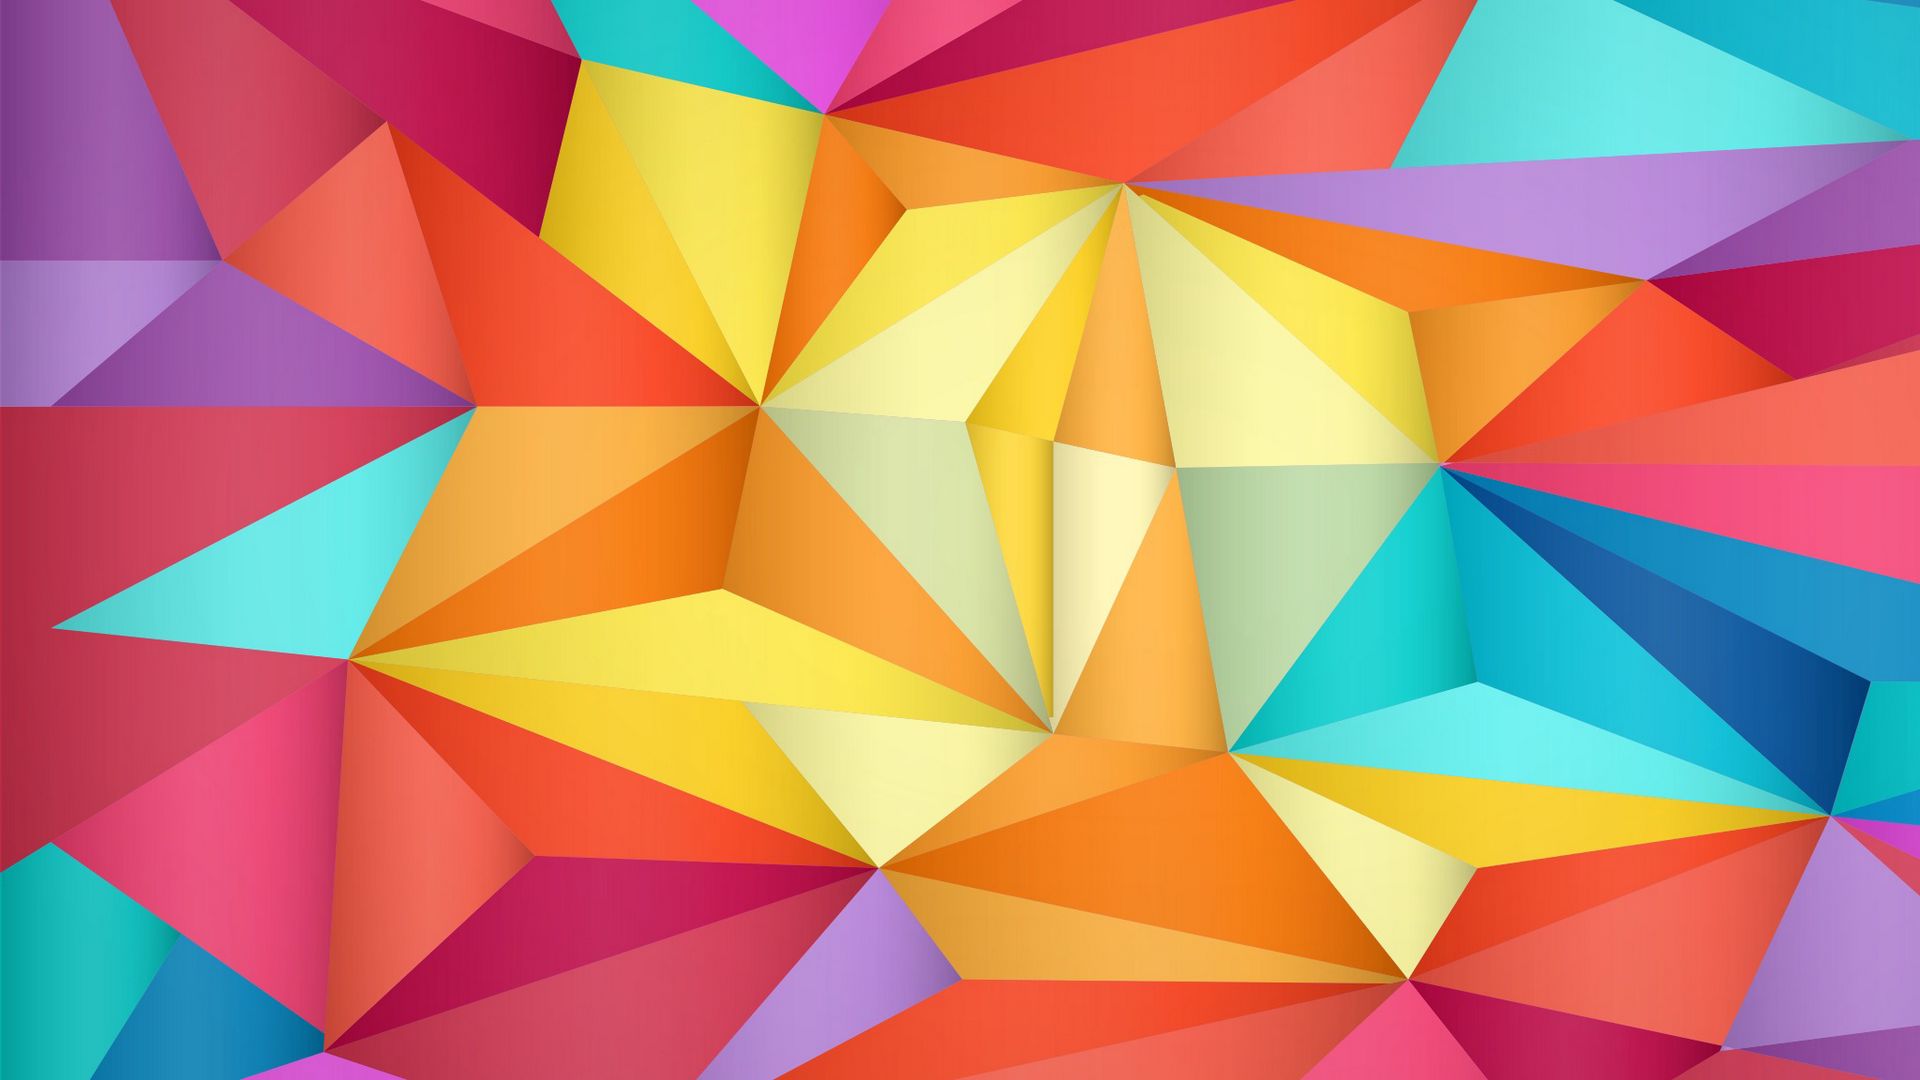 Download wallpaper 1920x1080 abstraction, triangles, colorful full hd ...